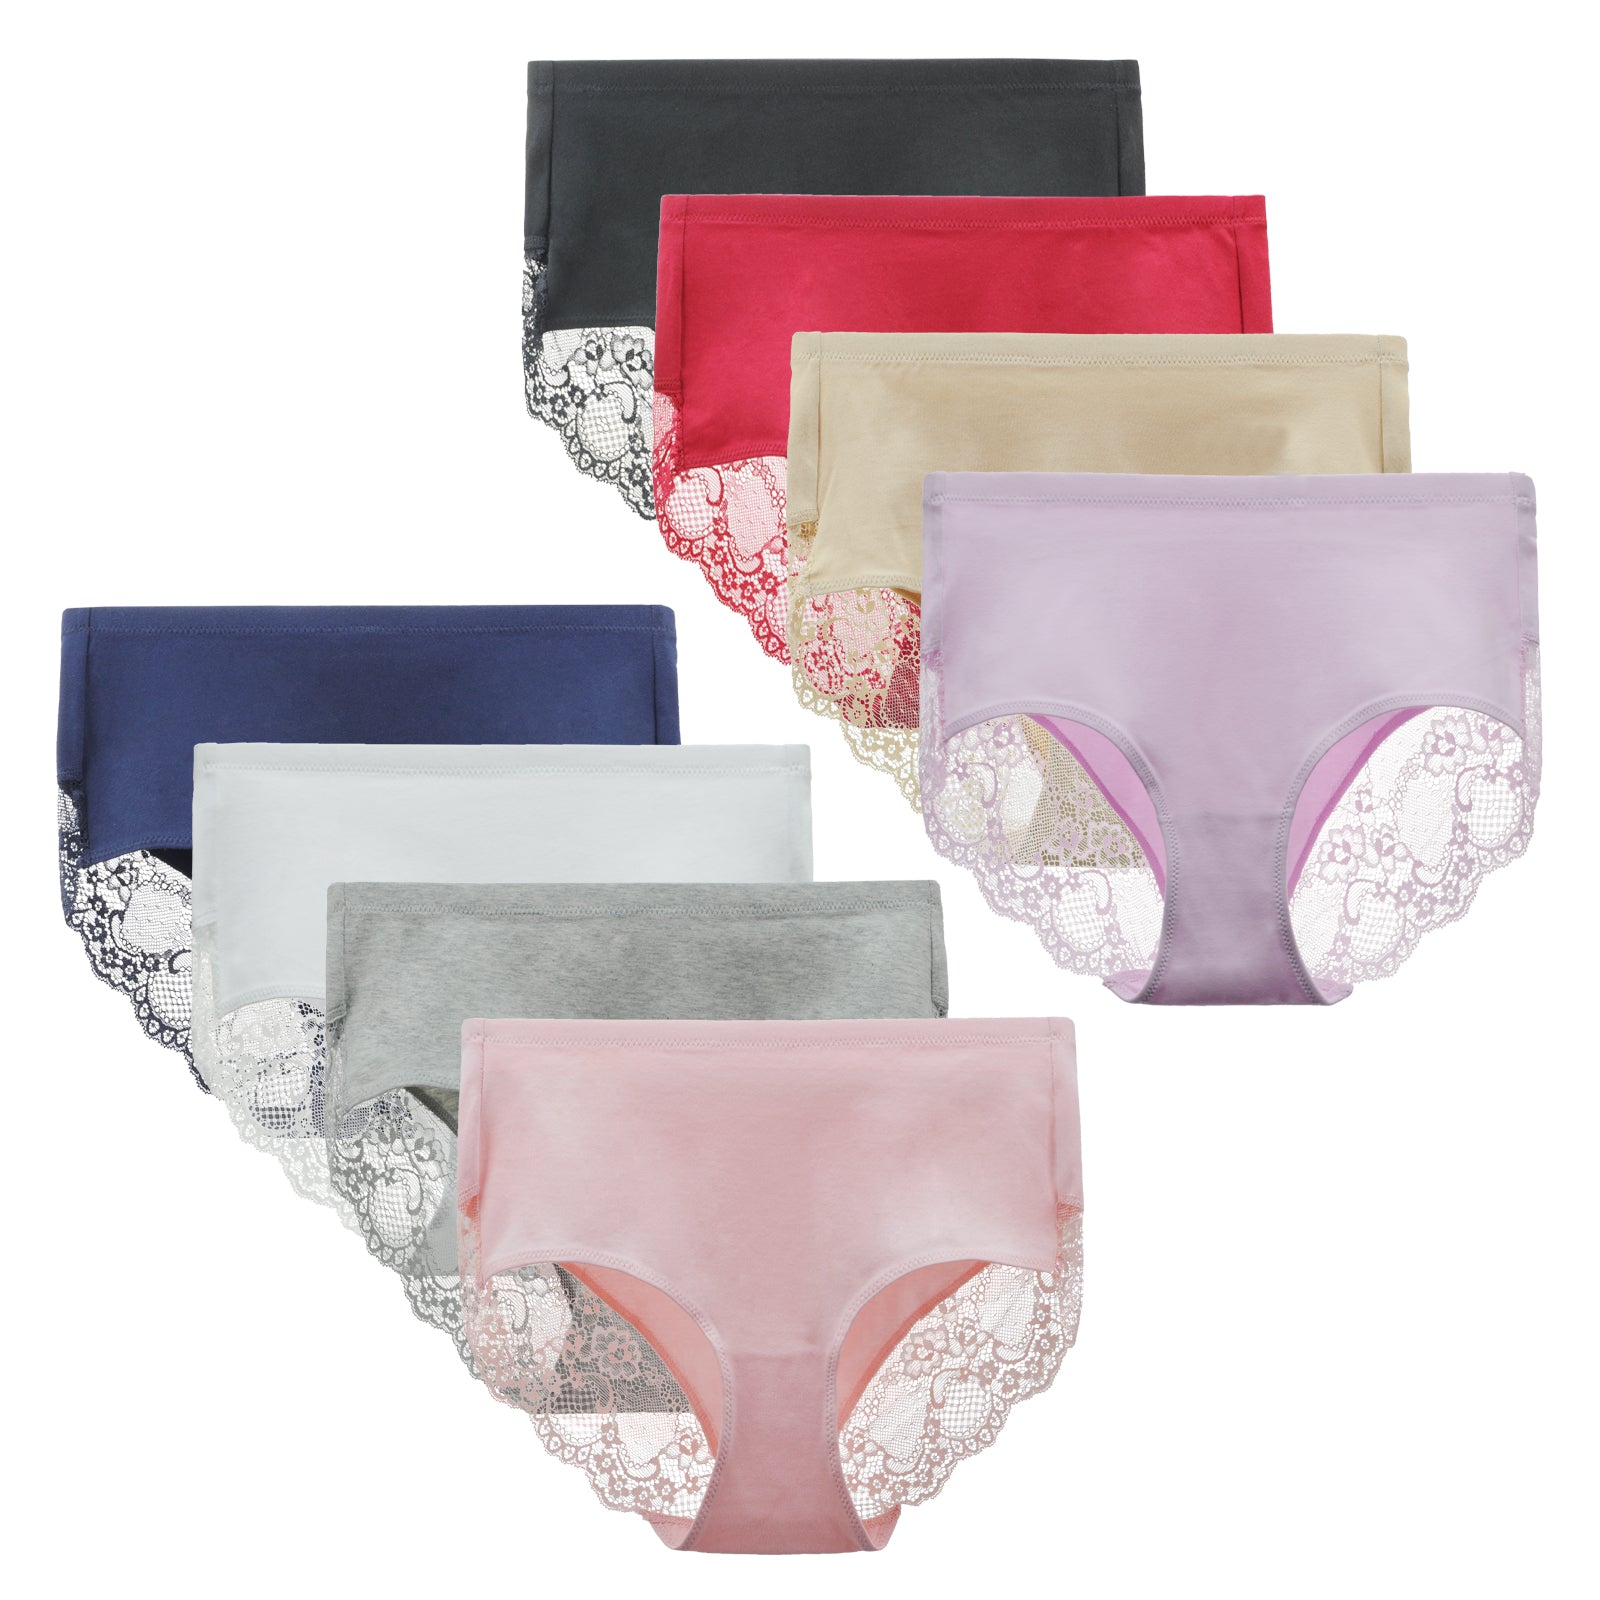 4 PACK Women's 100% Pure Silk Thin Sexy Lace Panties Briefs Underwear  Lingerie Intimates M L